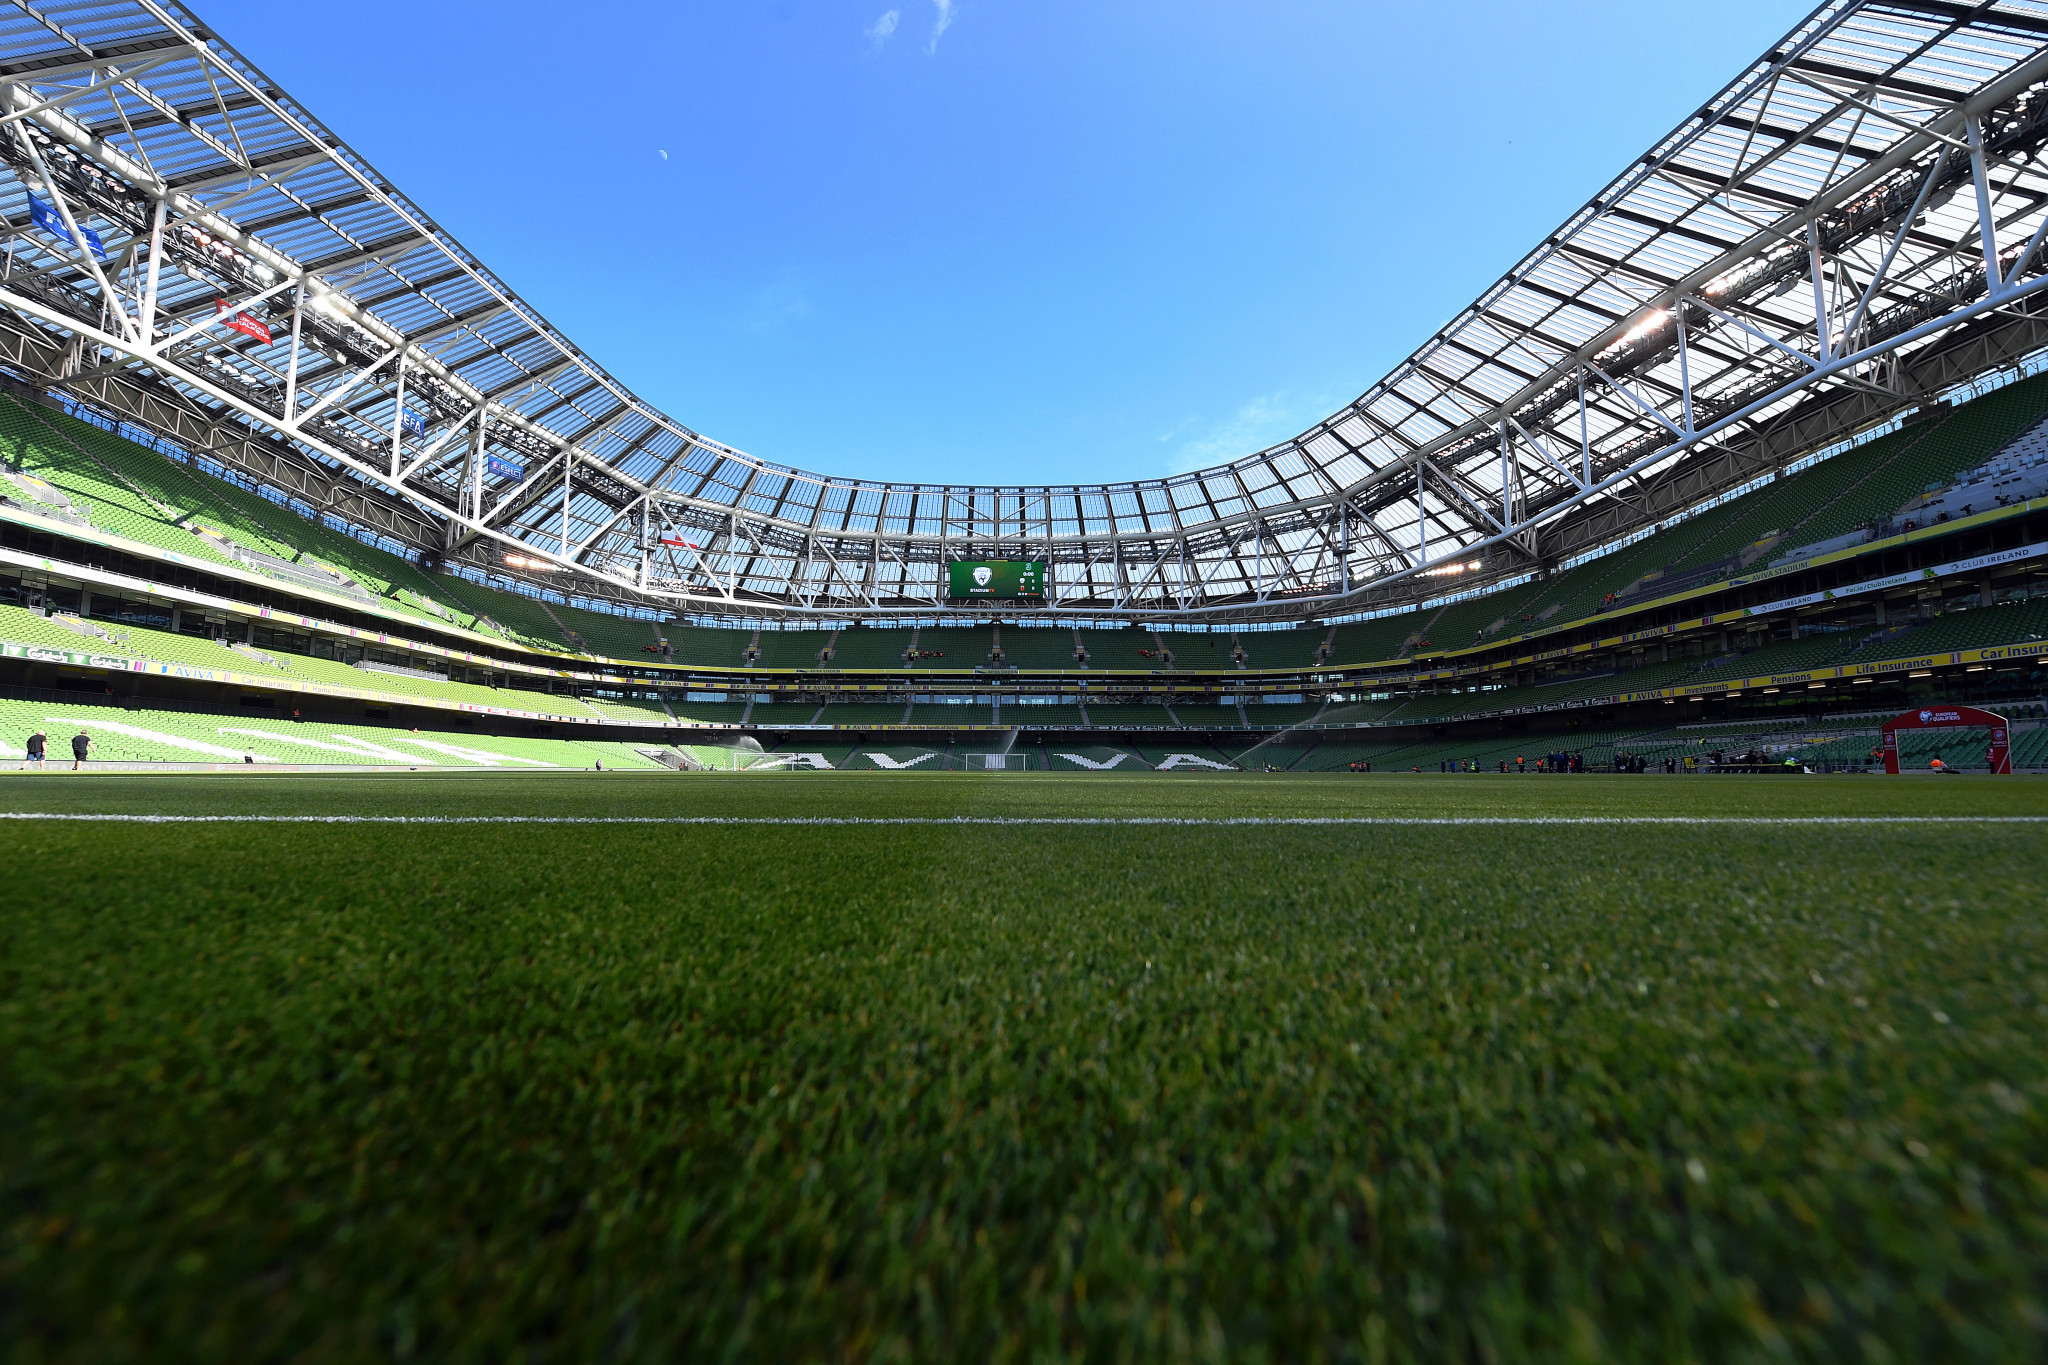 Dublin's Aviva Stadium was due to host UEFA Euro 2020 matches, but was dropped as a venue due to a failure to guarantee that spectators would be permitted ©Getty Images